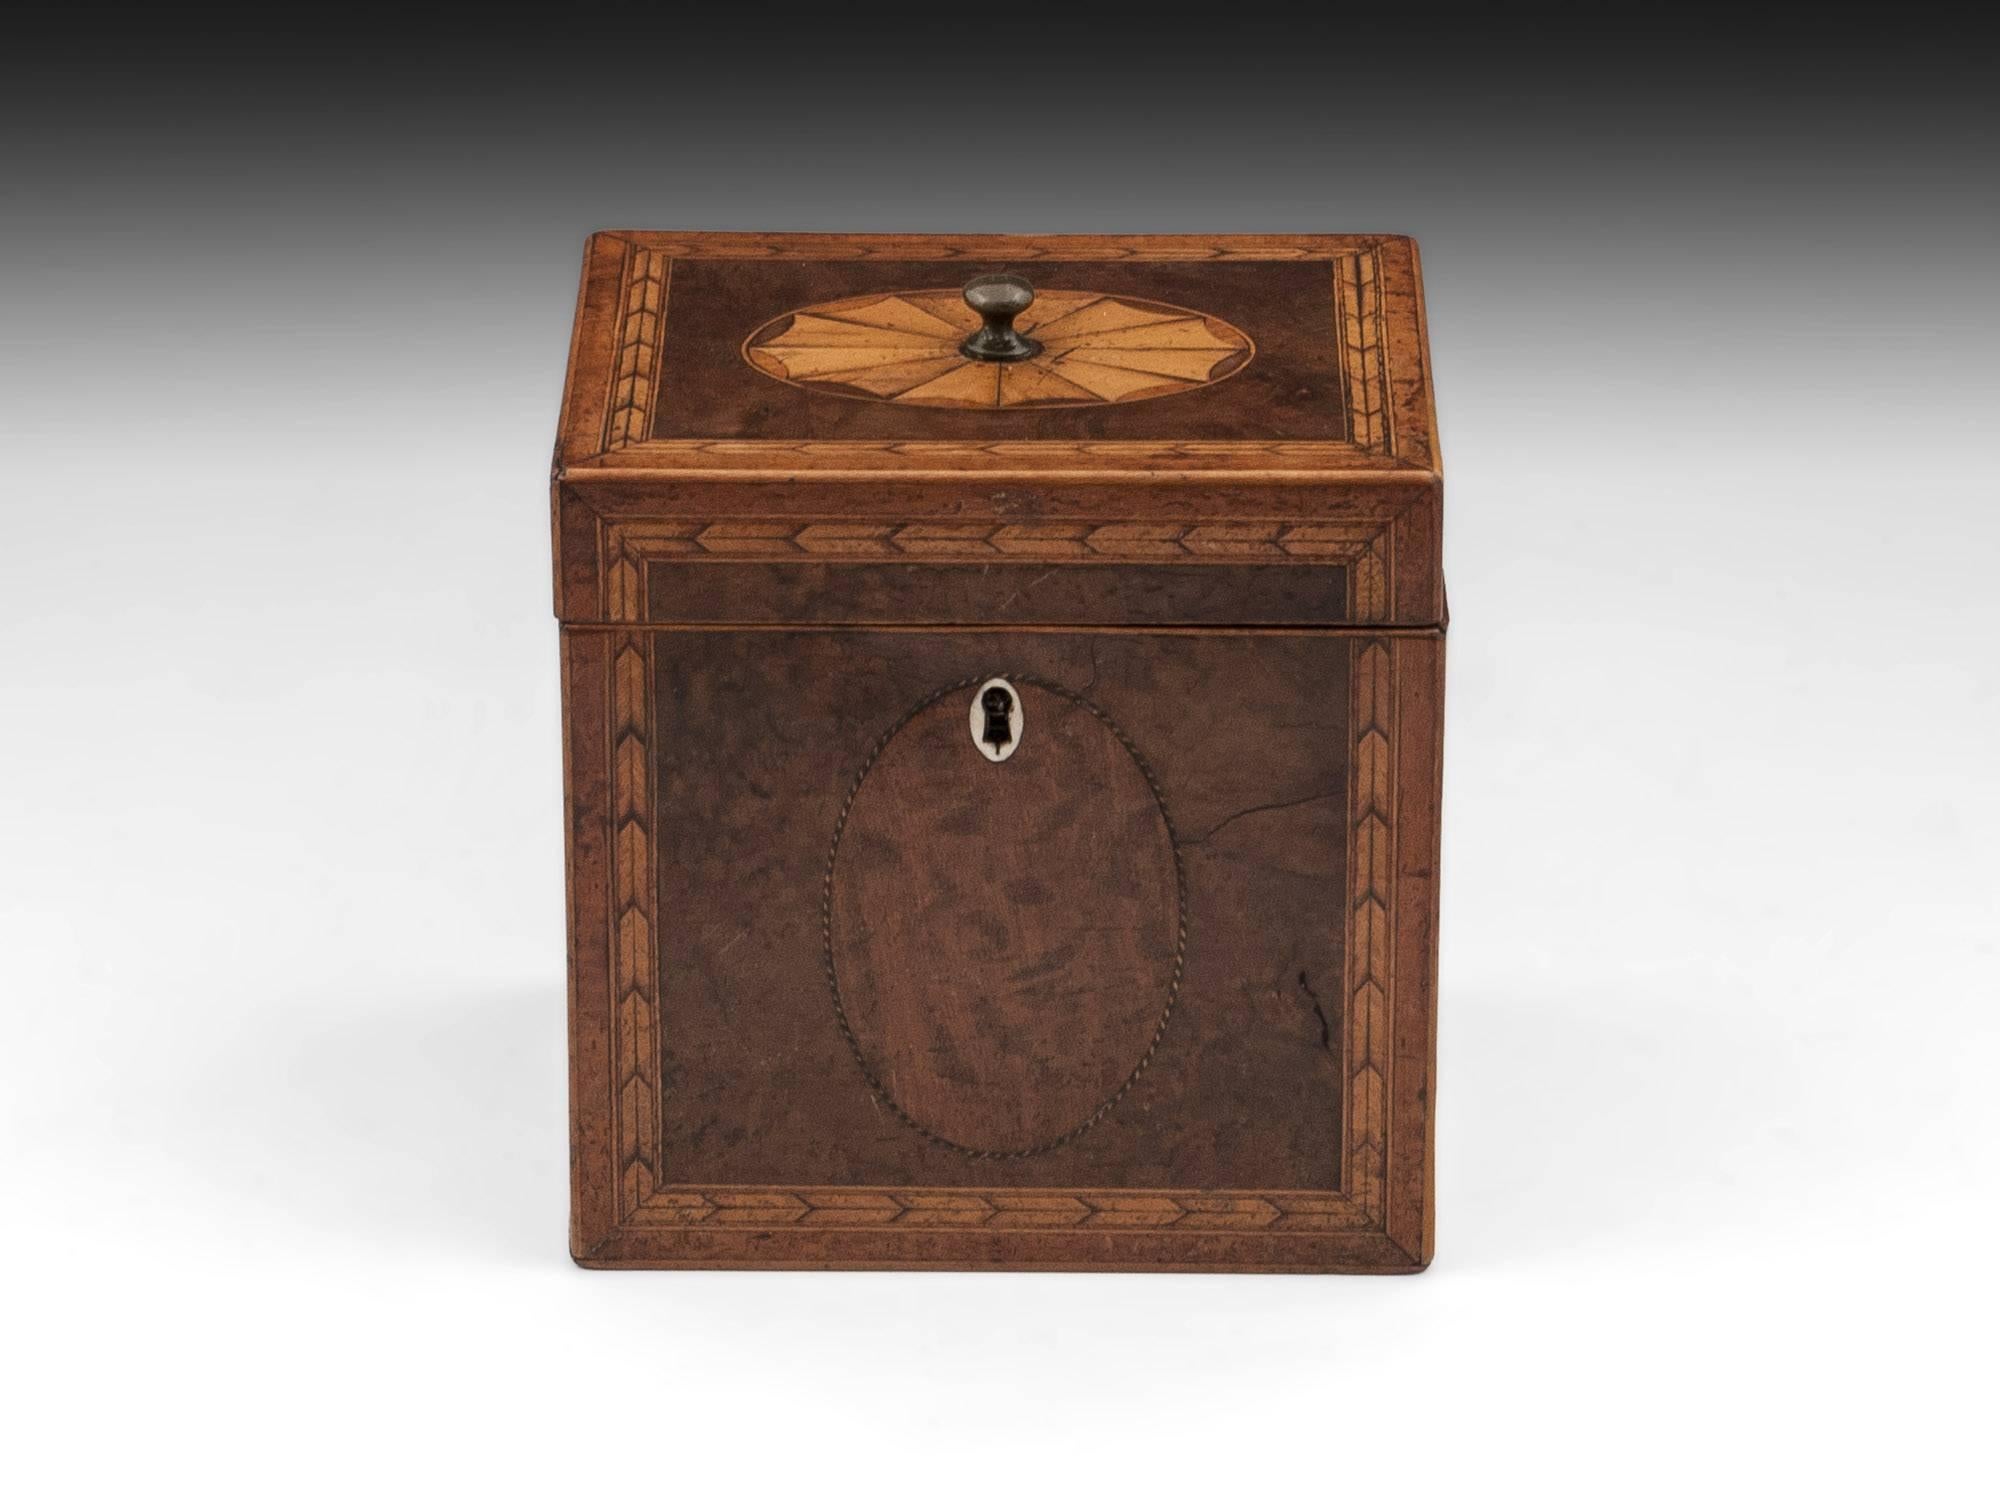 Antique single Tea Caddy veneered in stunning burr yew with inlaid oval fan to the top and herringbone inlay mirroring the front with a brass handle in the center to help to lift the lid, the front has a delicate oval bone escutcheon / key profile.